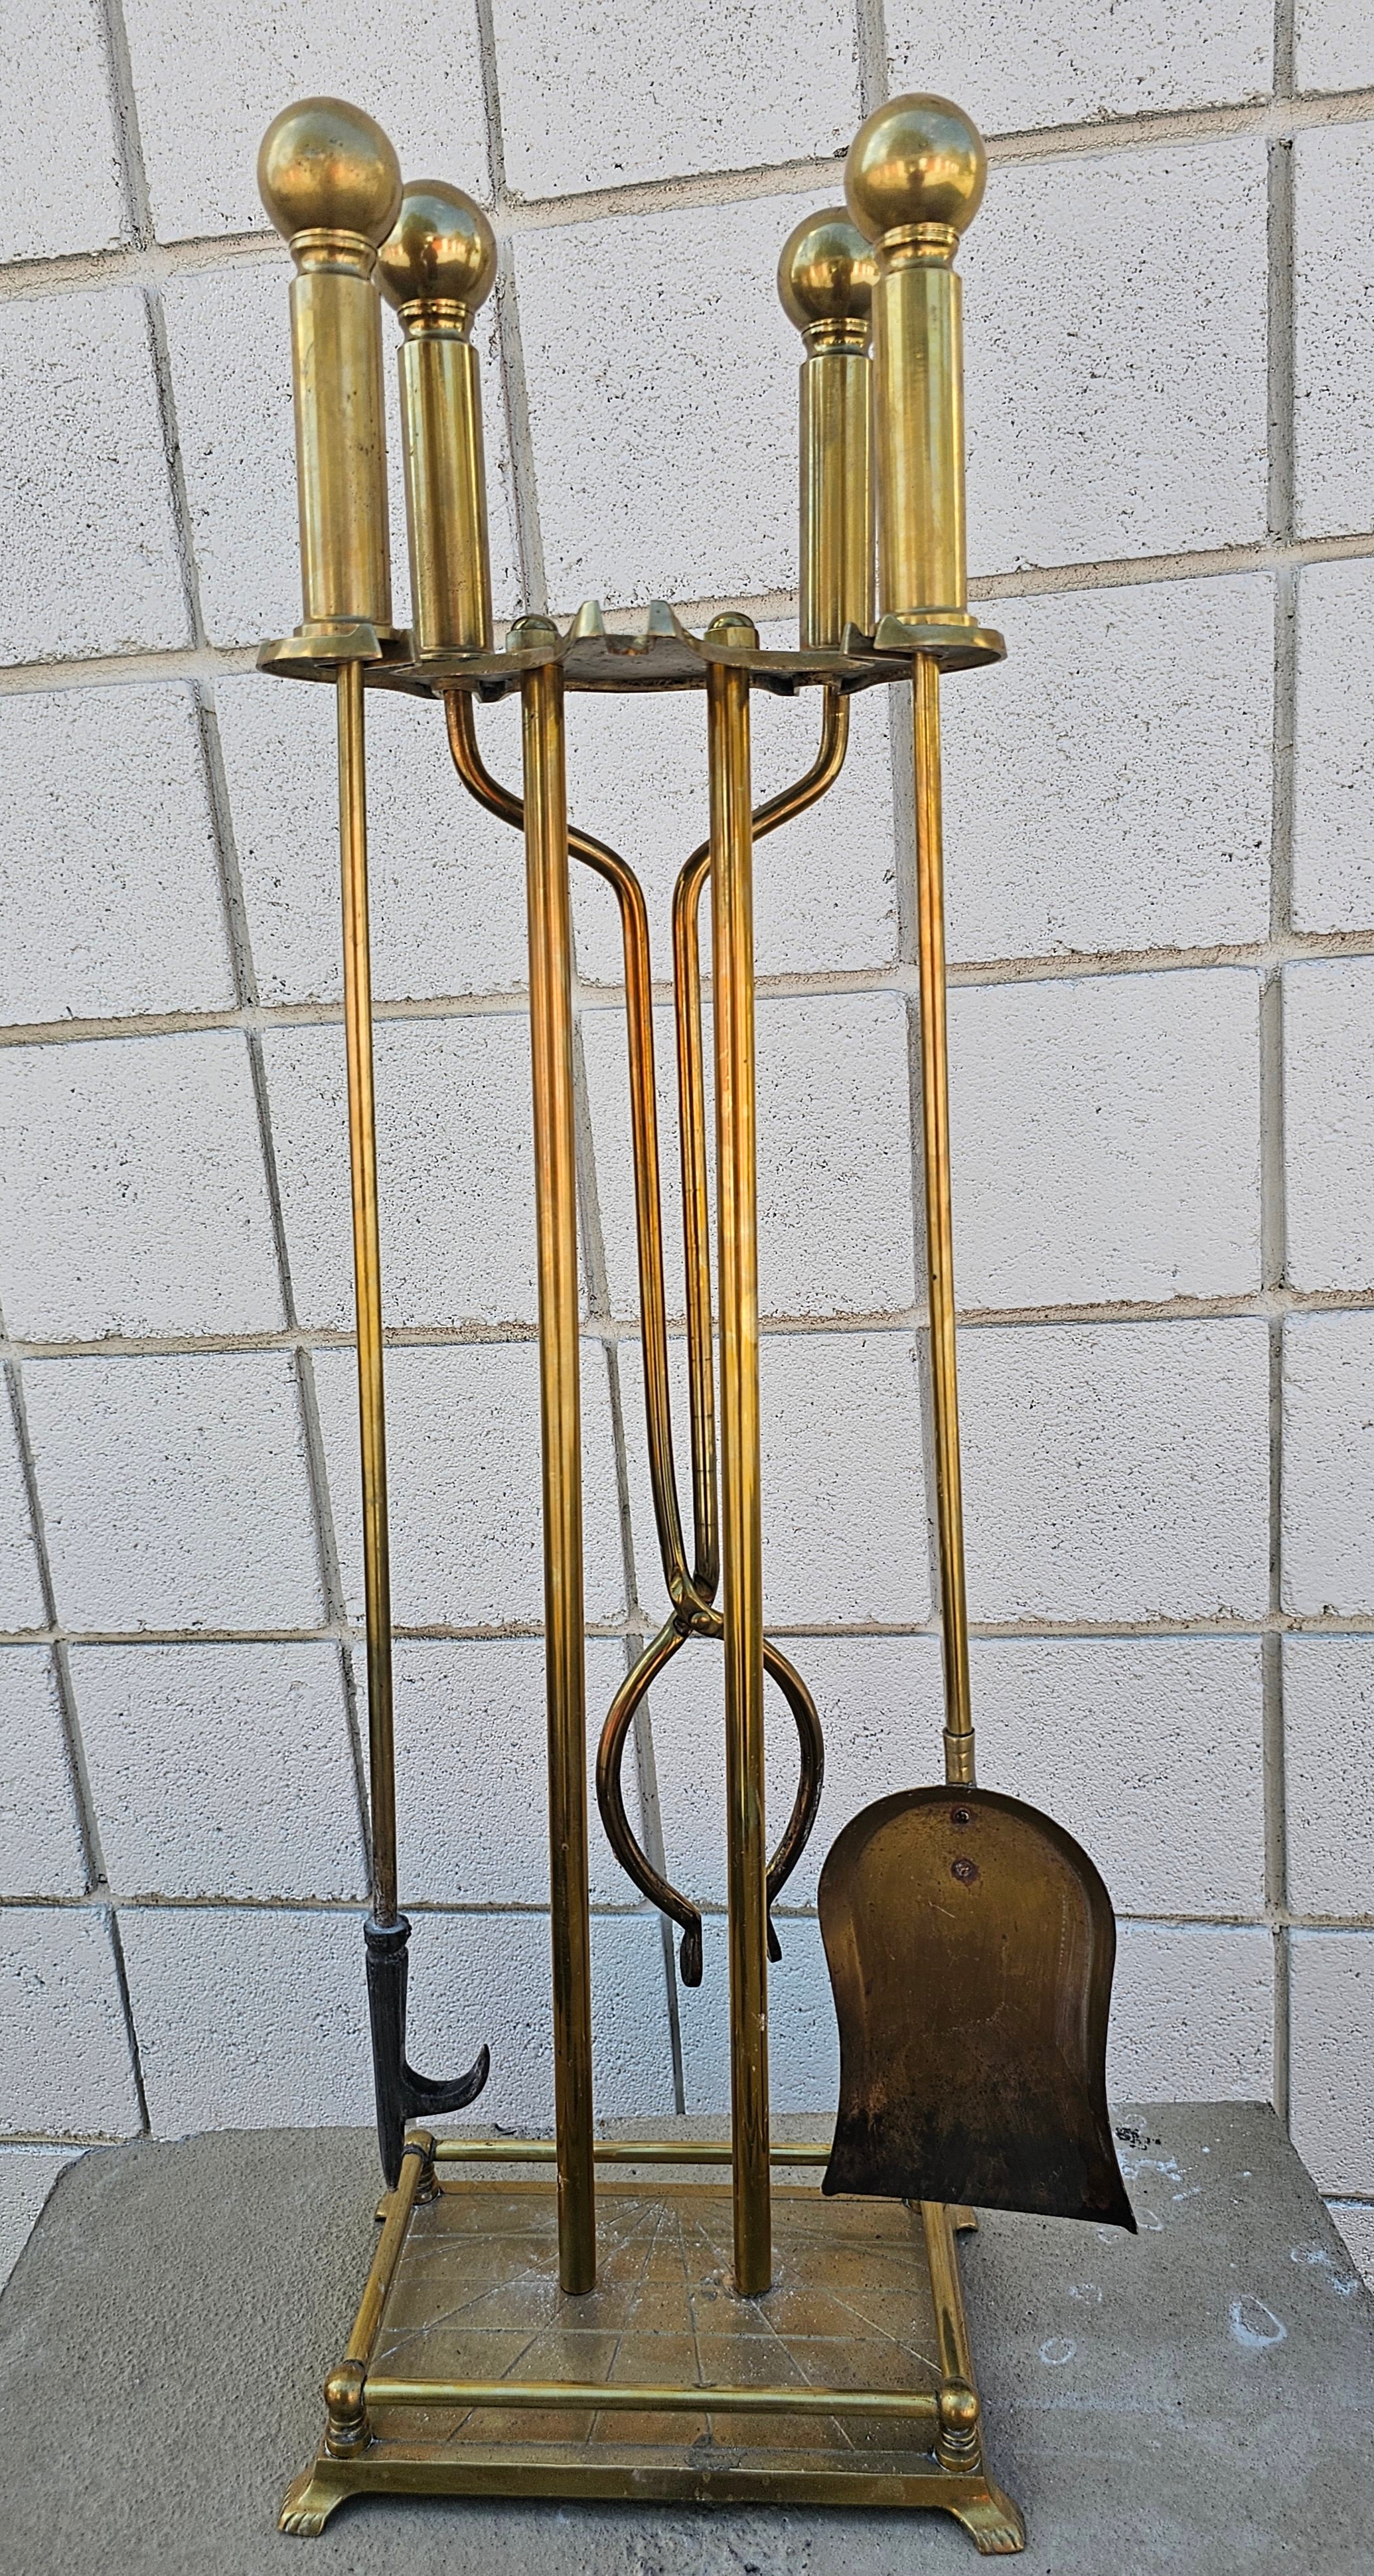 A 19th Century Ball Head Brass Fireplace Tools Set in good antique condition.
Measures 11